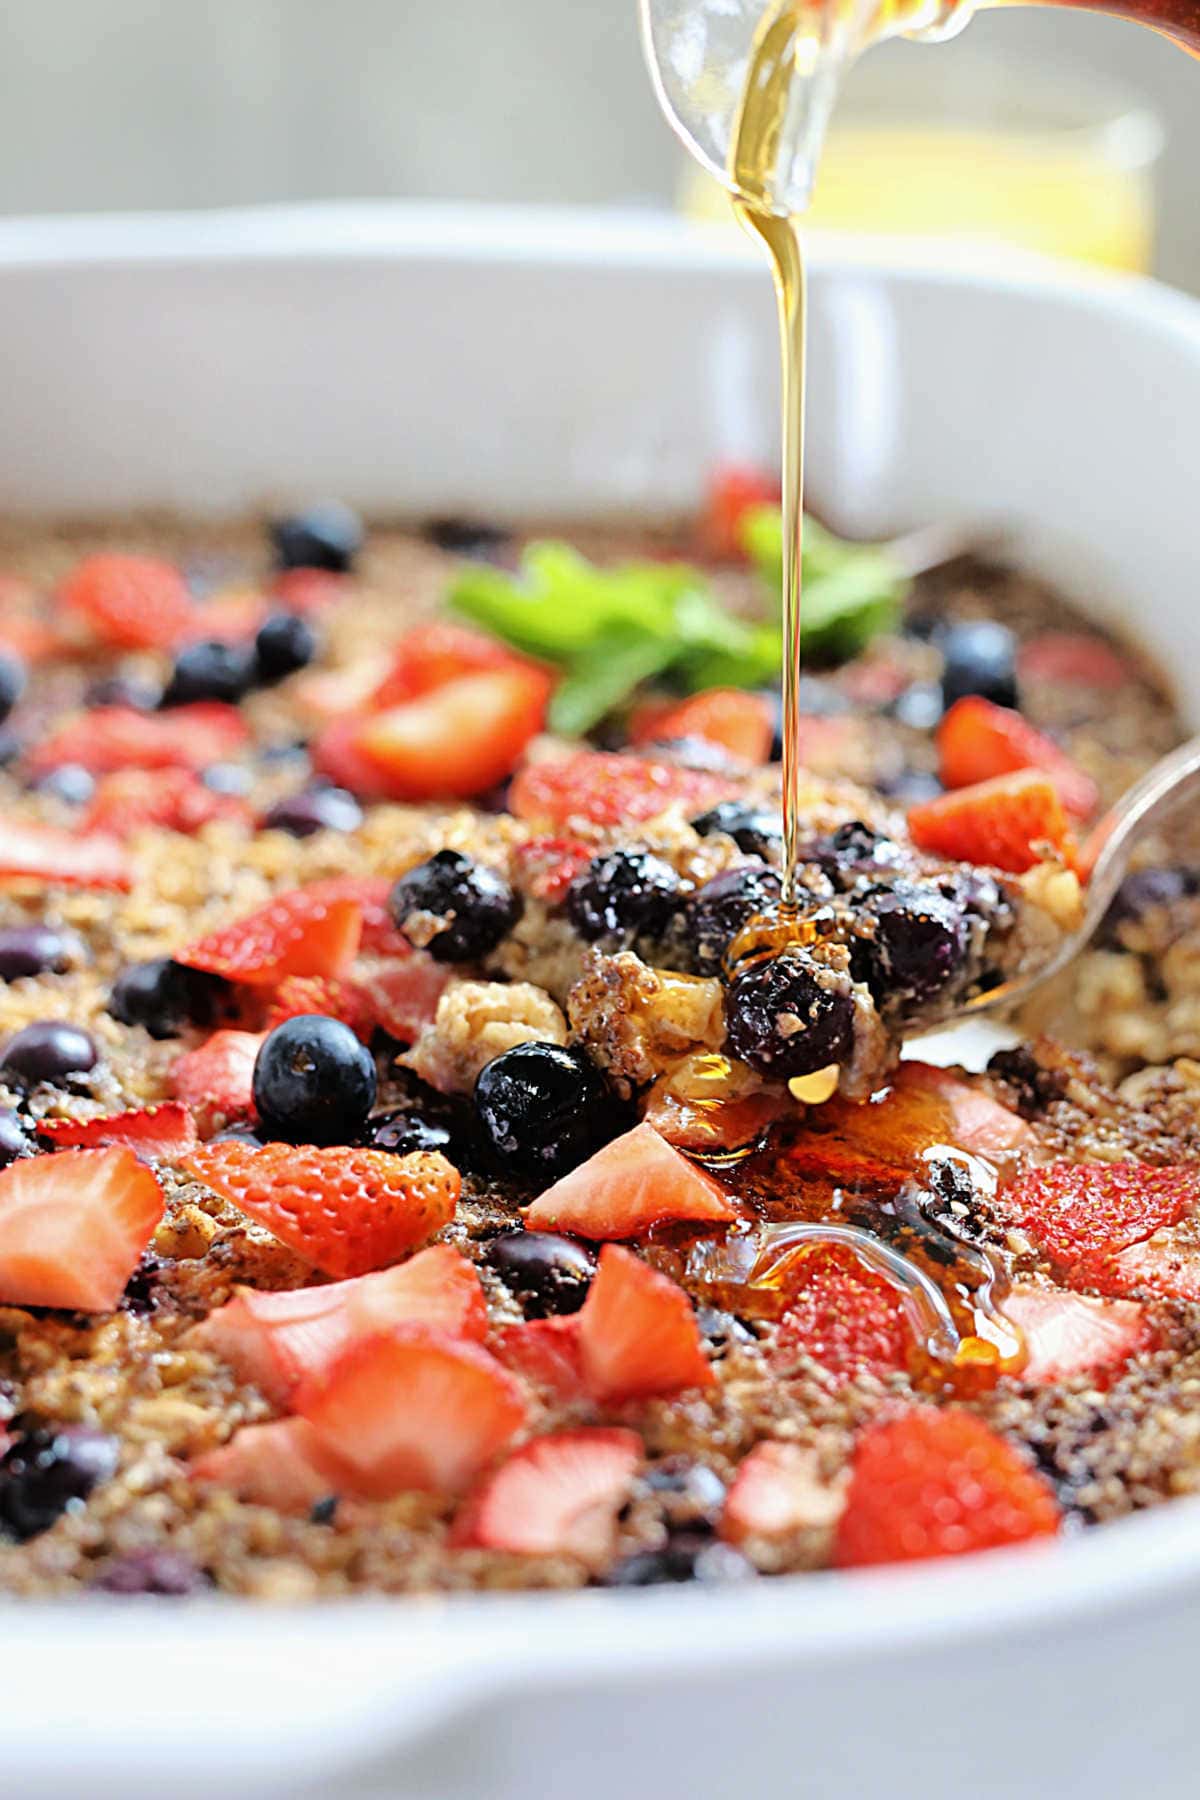 maple syrup drizzling over baked oatmeal with berries